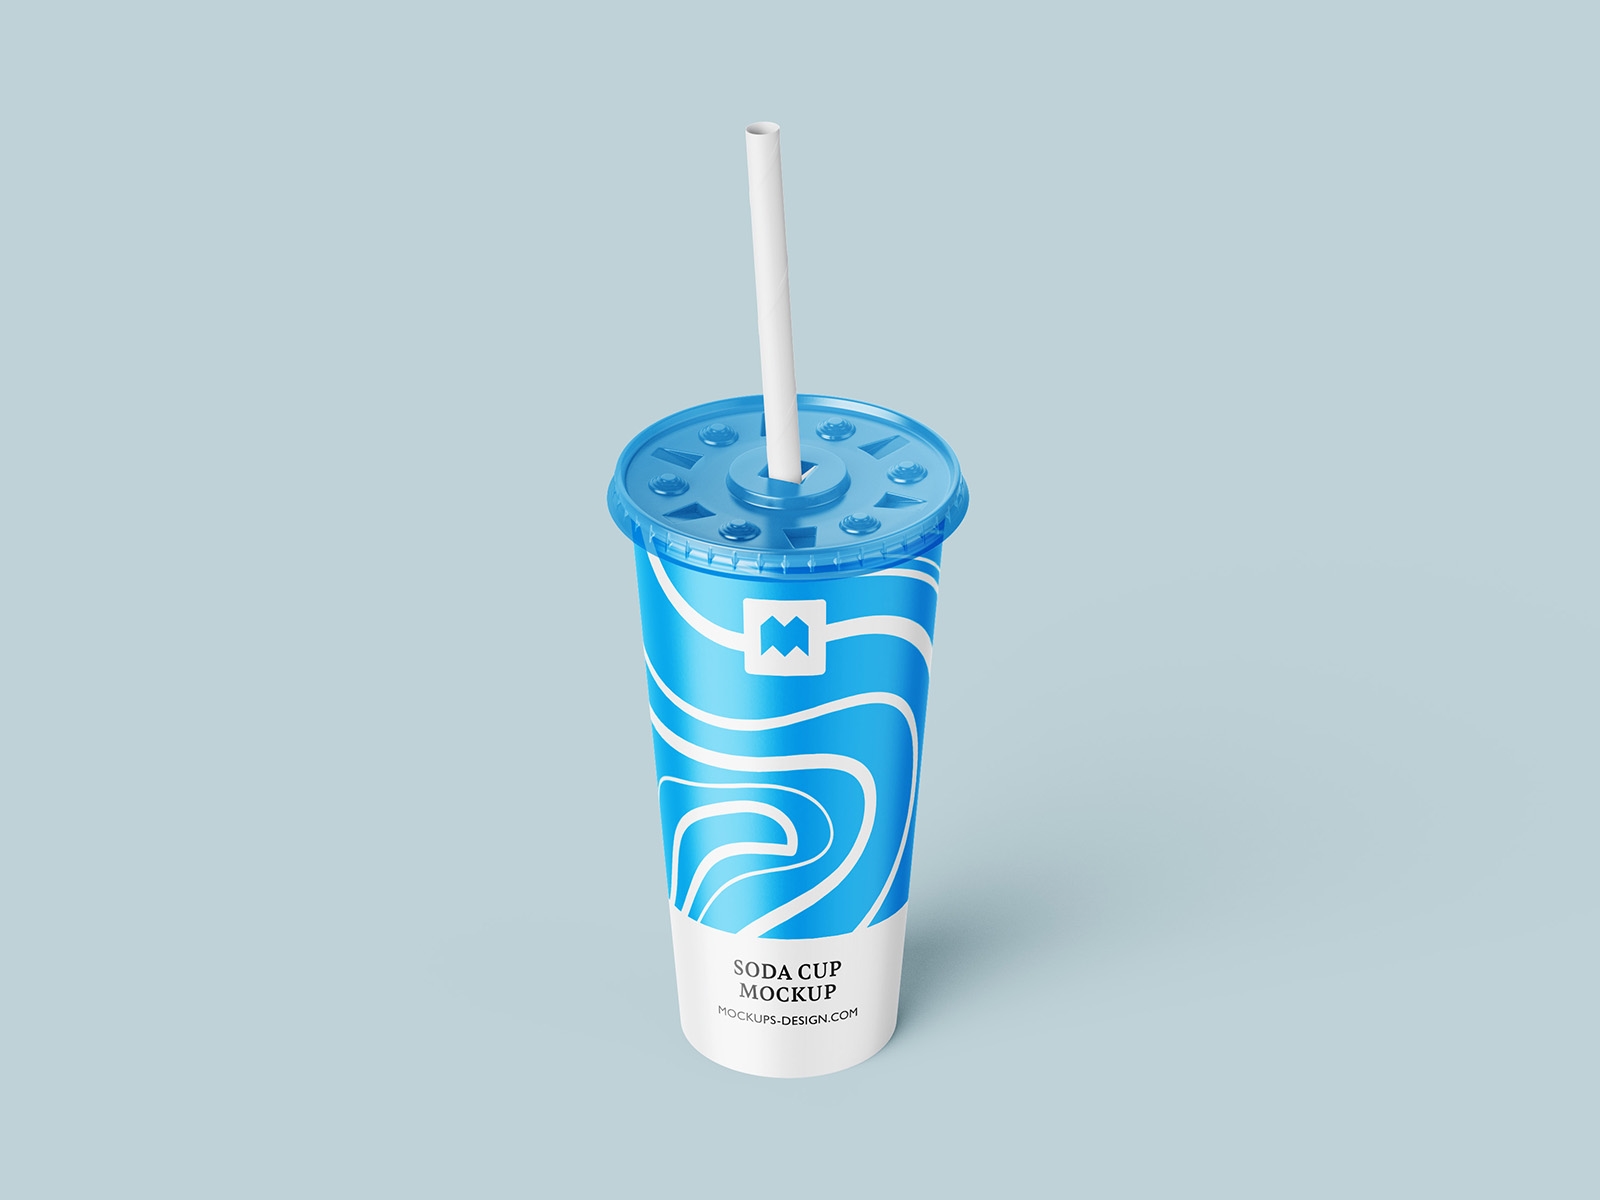 https://resourceboy.com/wp-content/uploads/2022/09/3-mockups-of-soda-drink-cup-with-straw-2.jpg